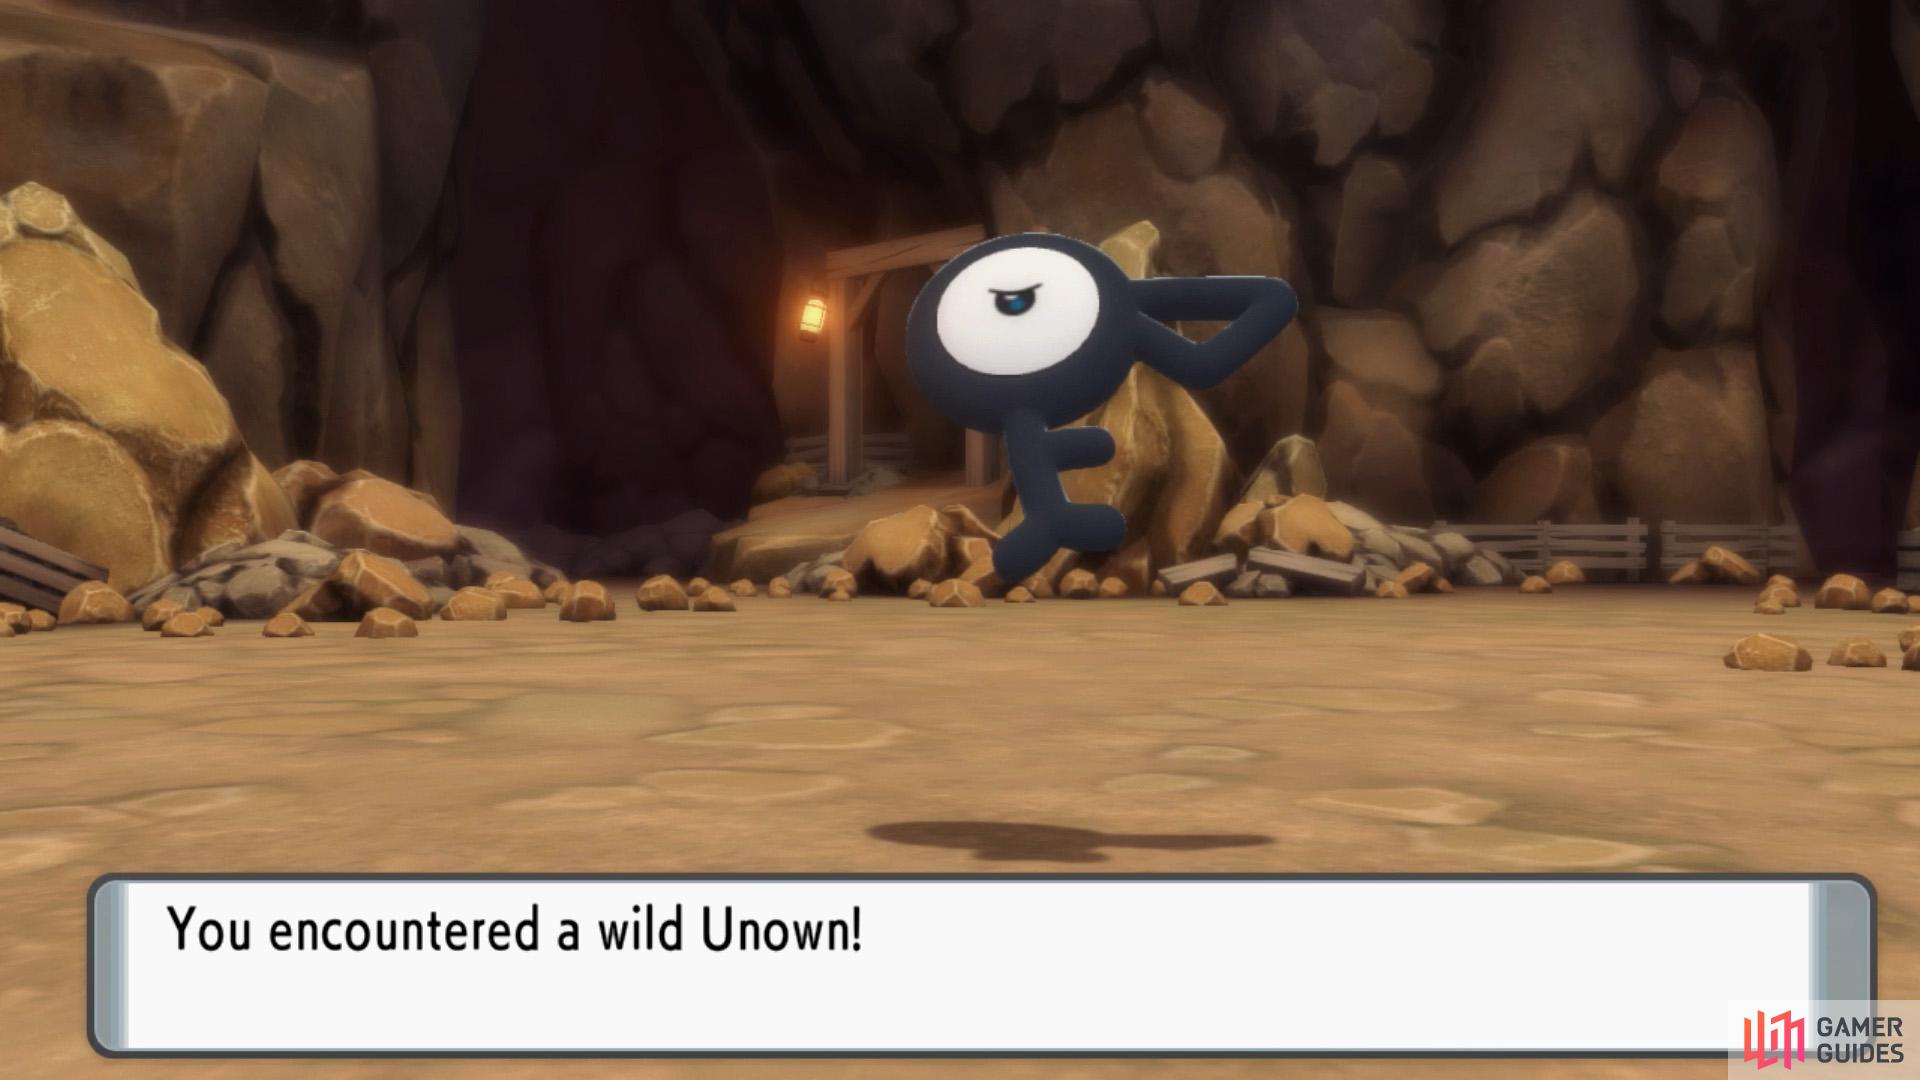 Unown F is wandering the second large room.